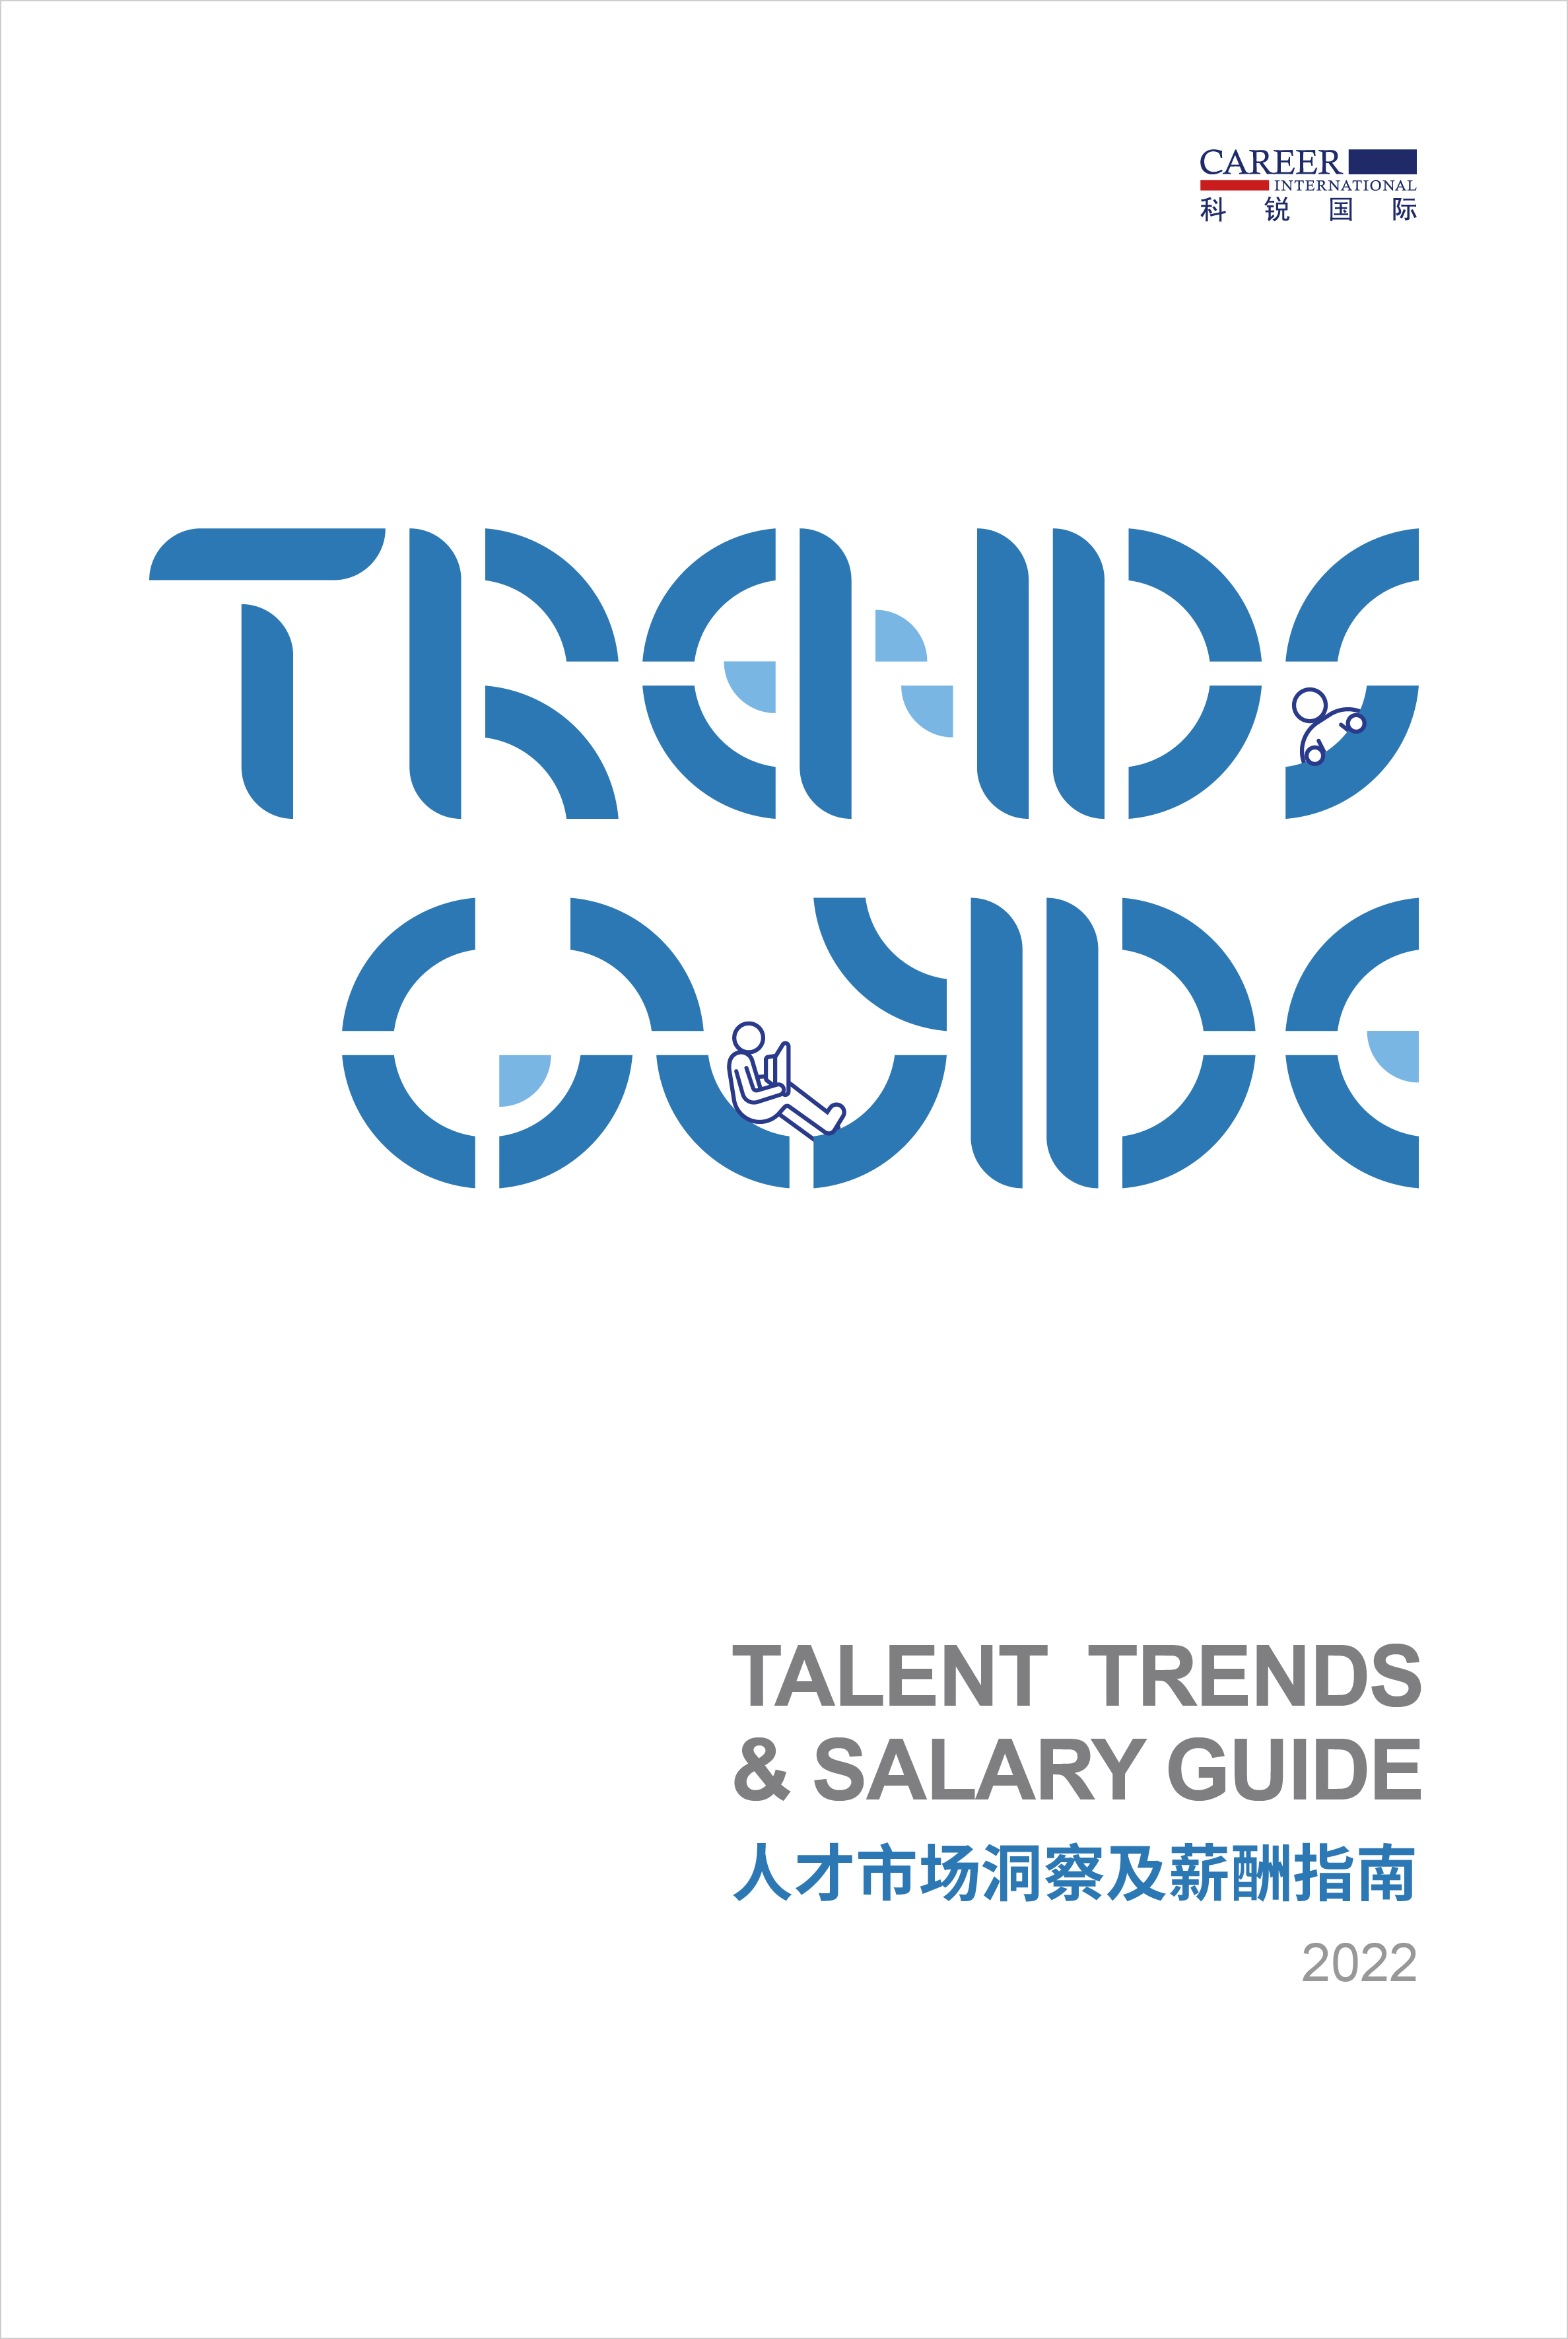 Talent Trends and Salary Guide 2022